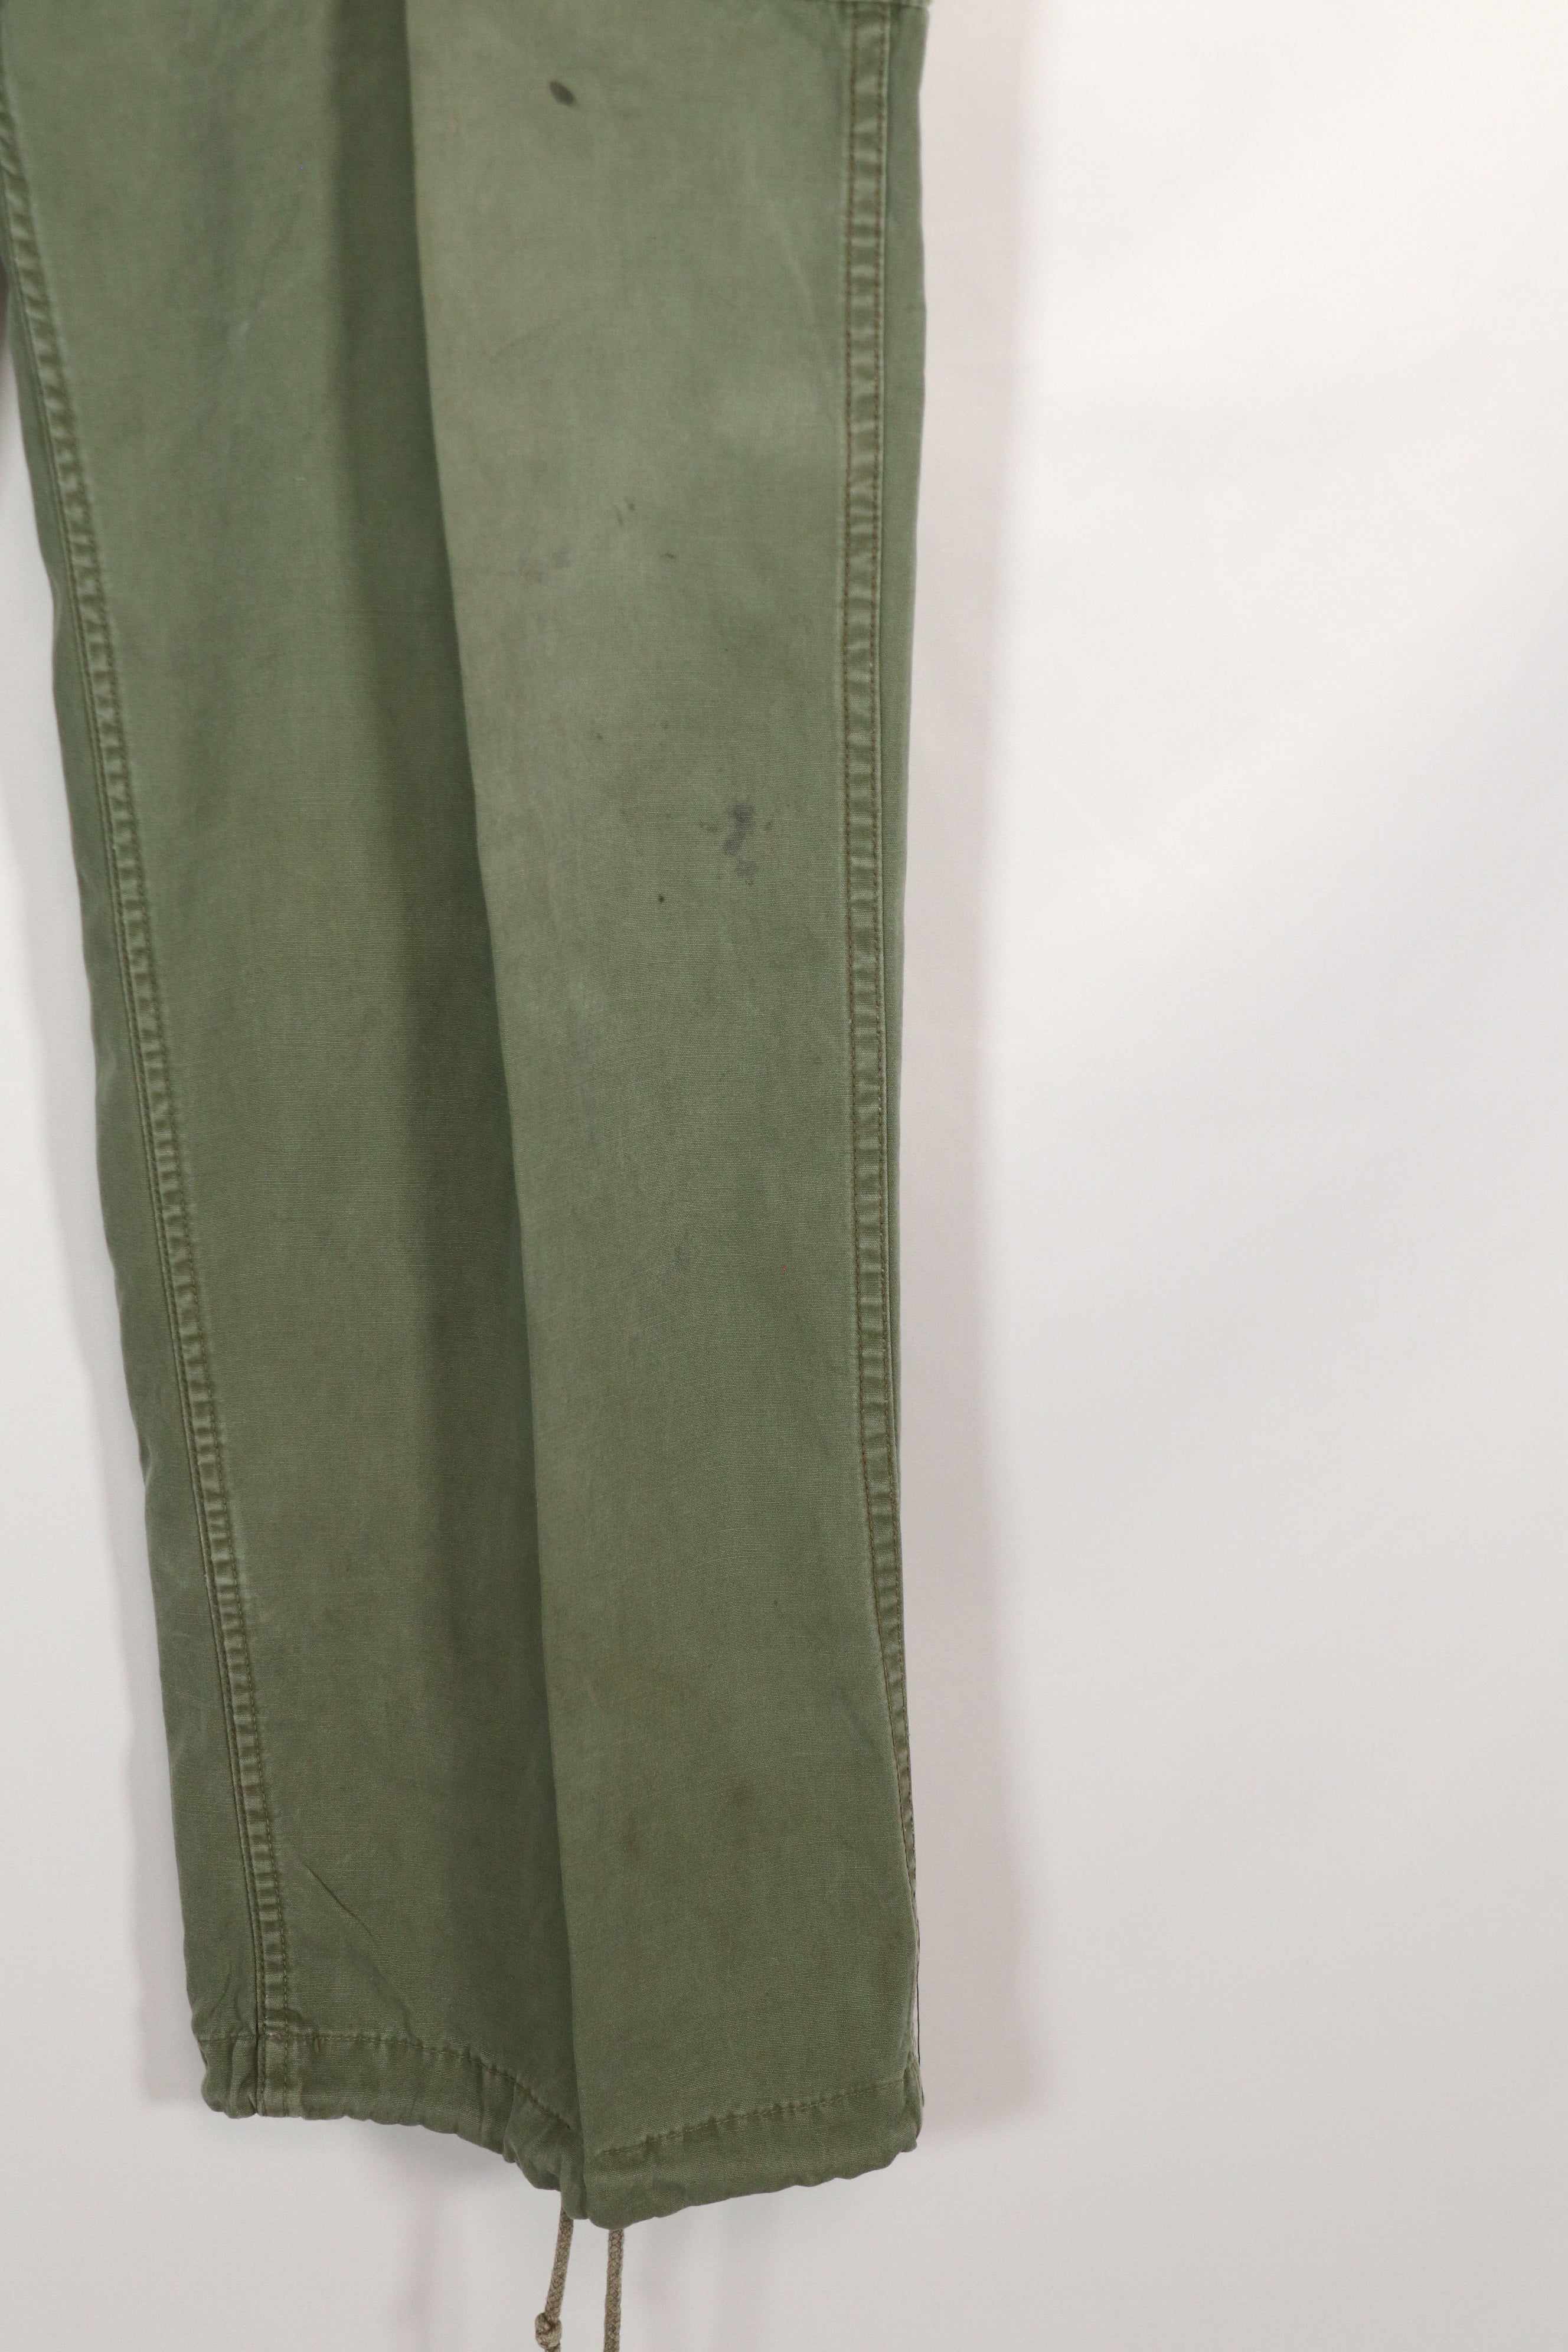 Real 1963 1st Model Jungle Fatigue Pants without leg ties, used.